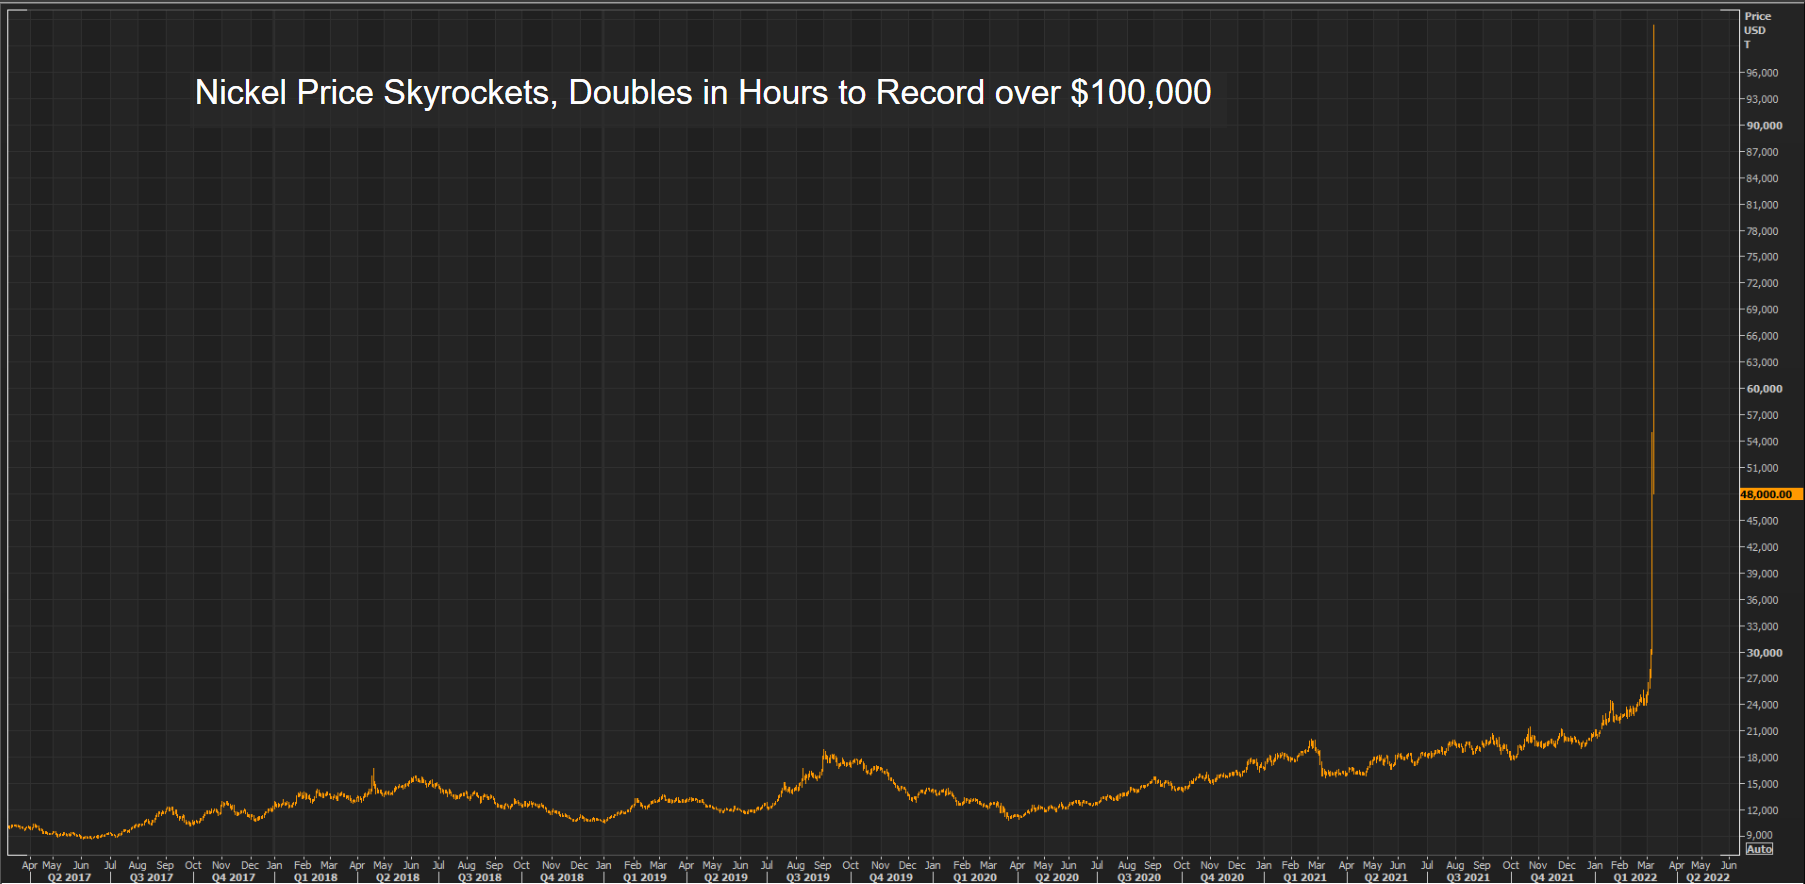 Nickel Prices Doubles in Hours to Record over $100,000